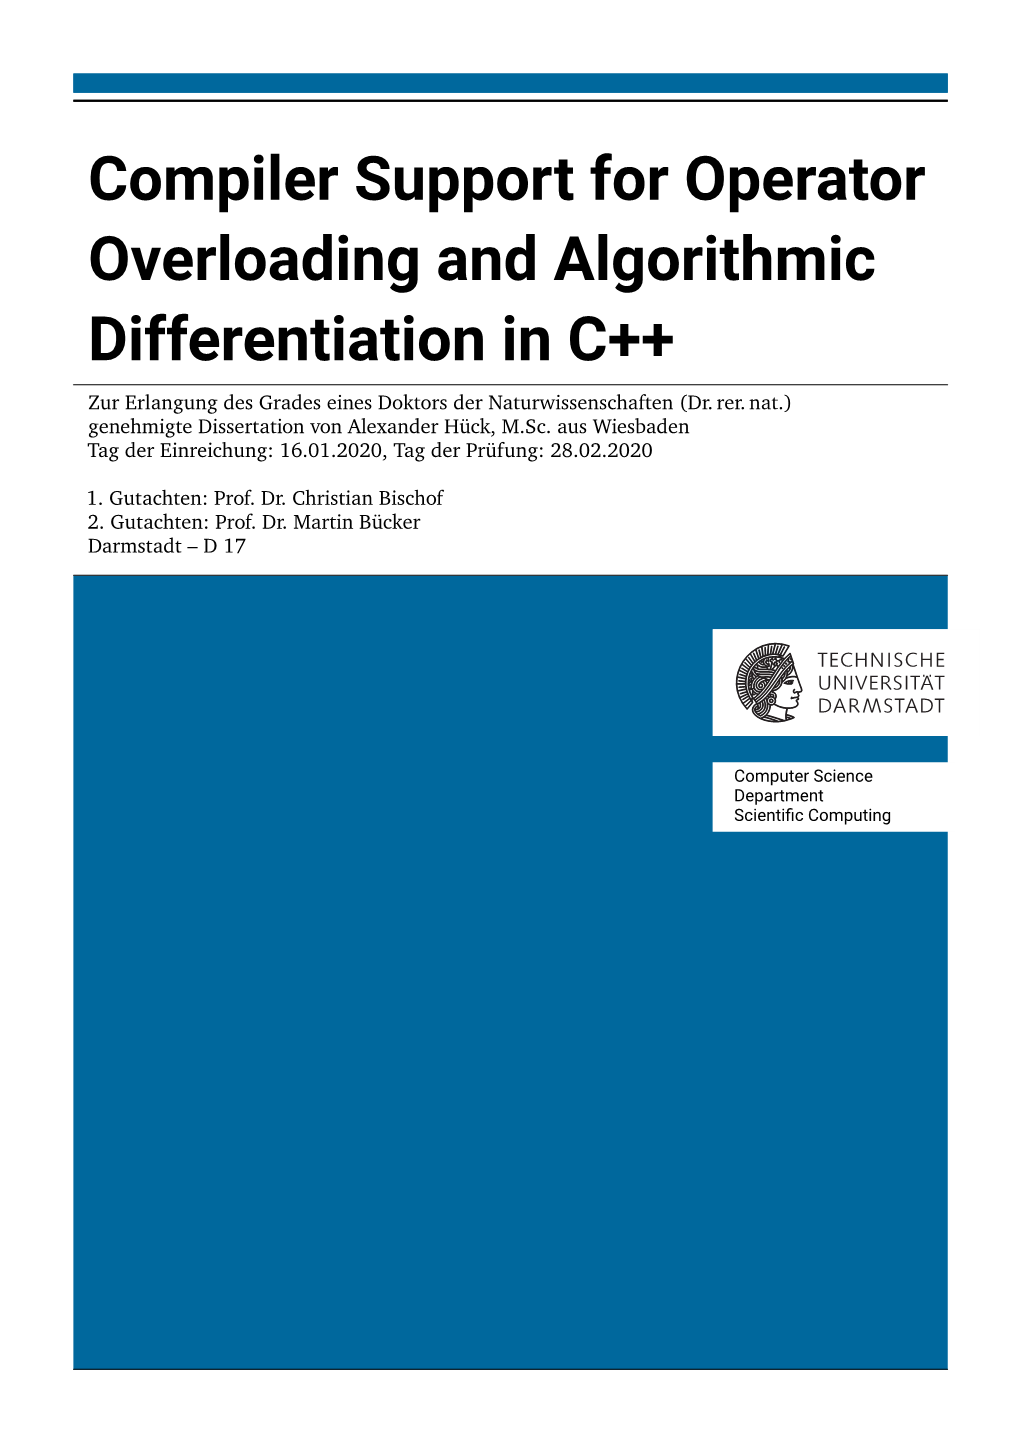 Compiler Support for Operator Overloading and Algorithmic Differentiation in C++